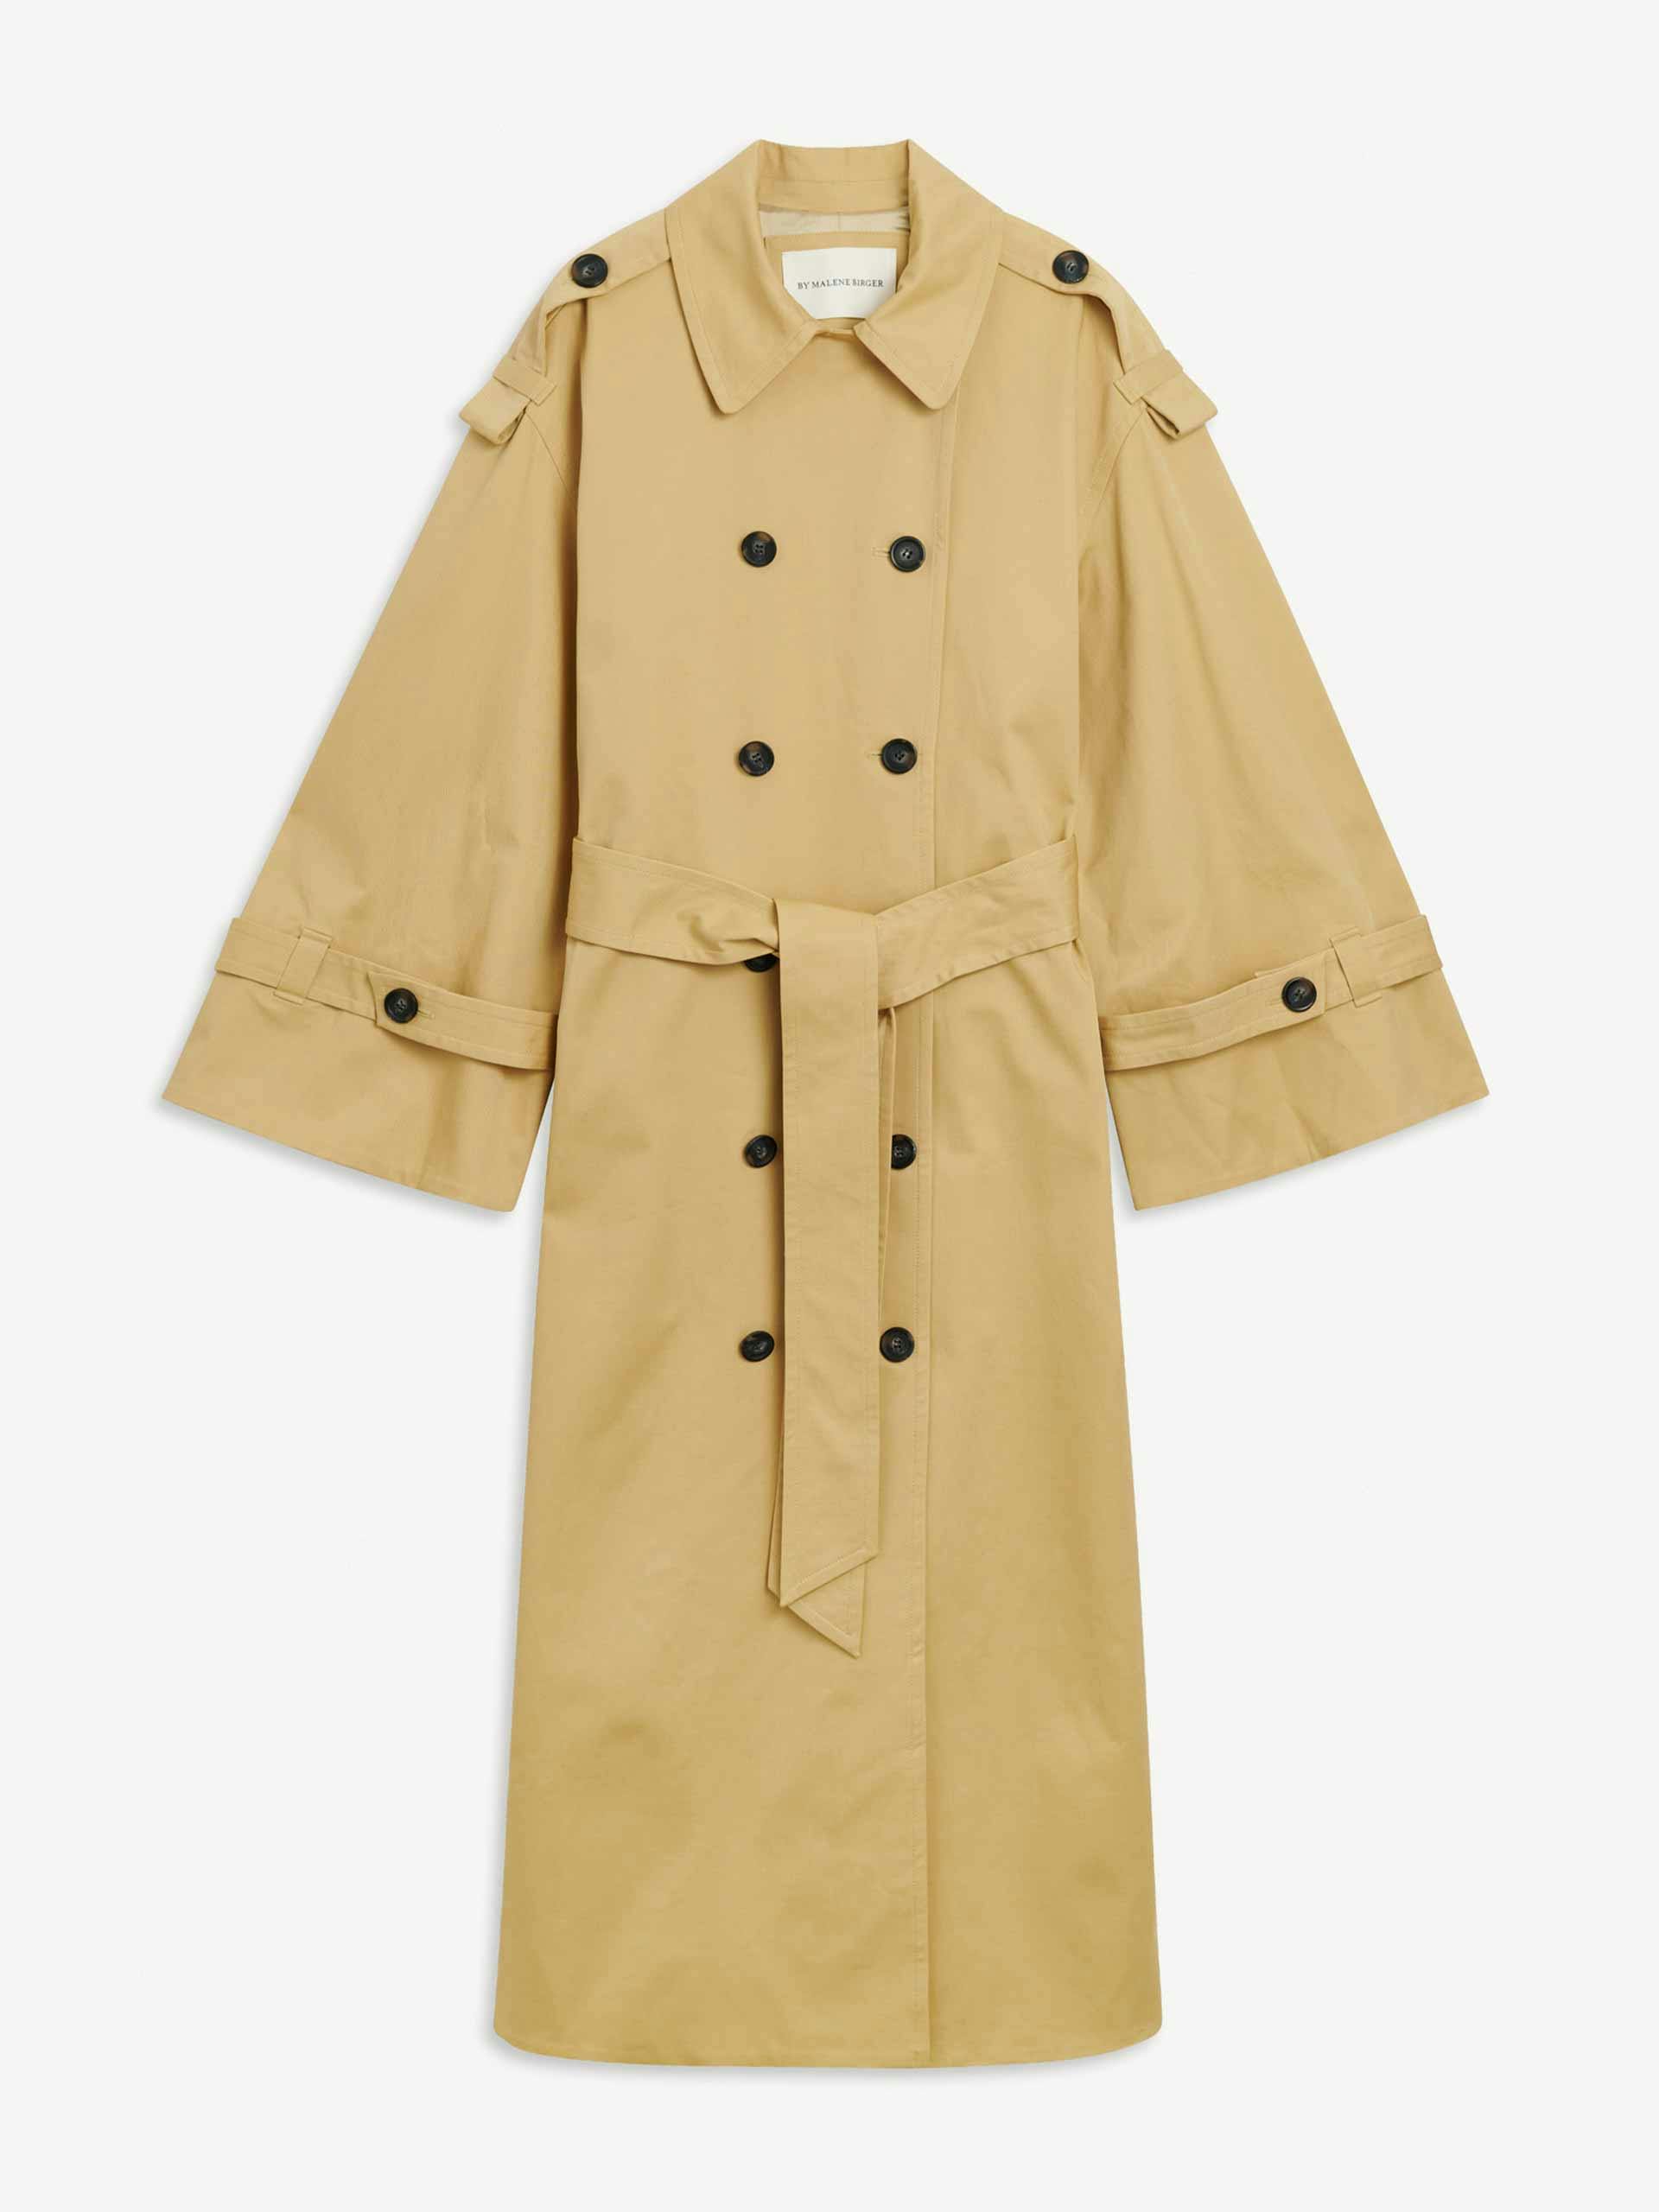 Oversized belted trench coat